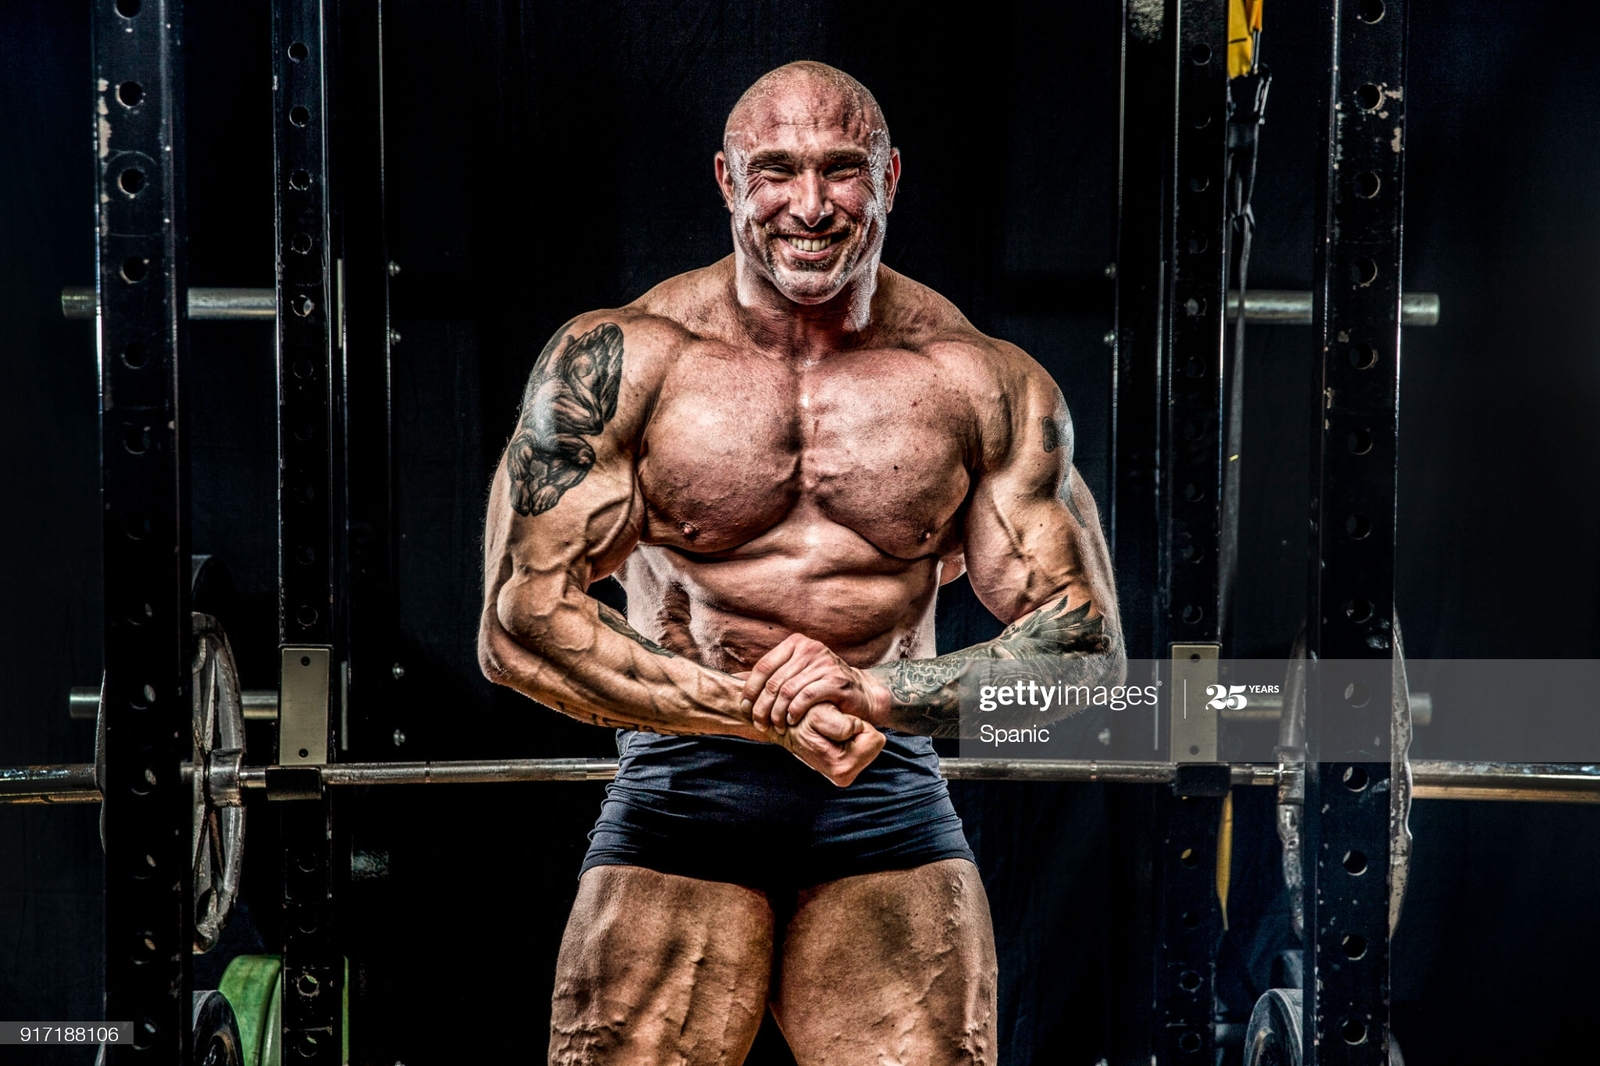 trong-muscular-man-picture-id917188106?s=2048x2048.jpg